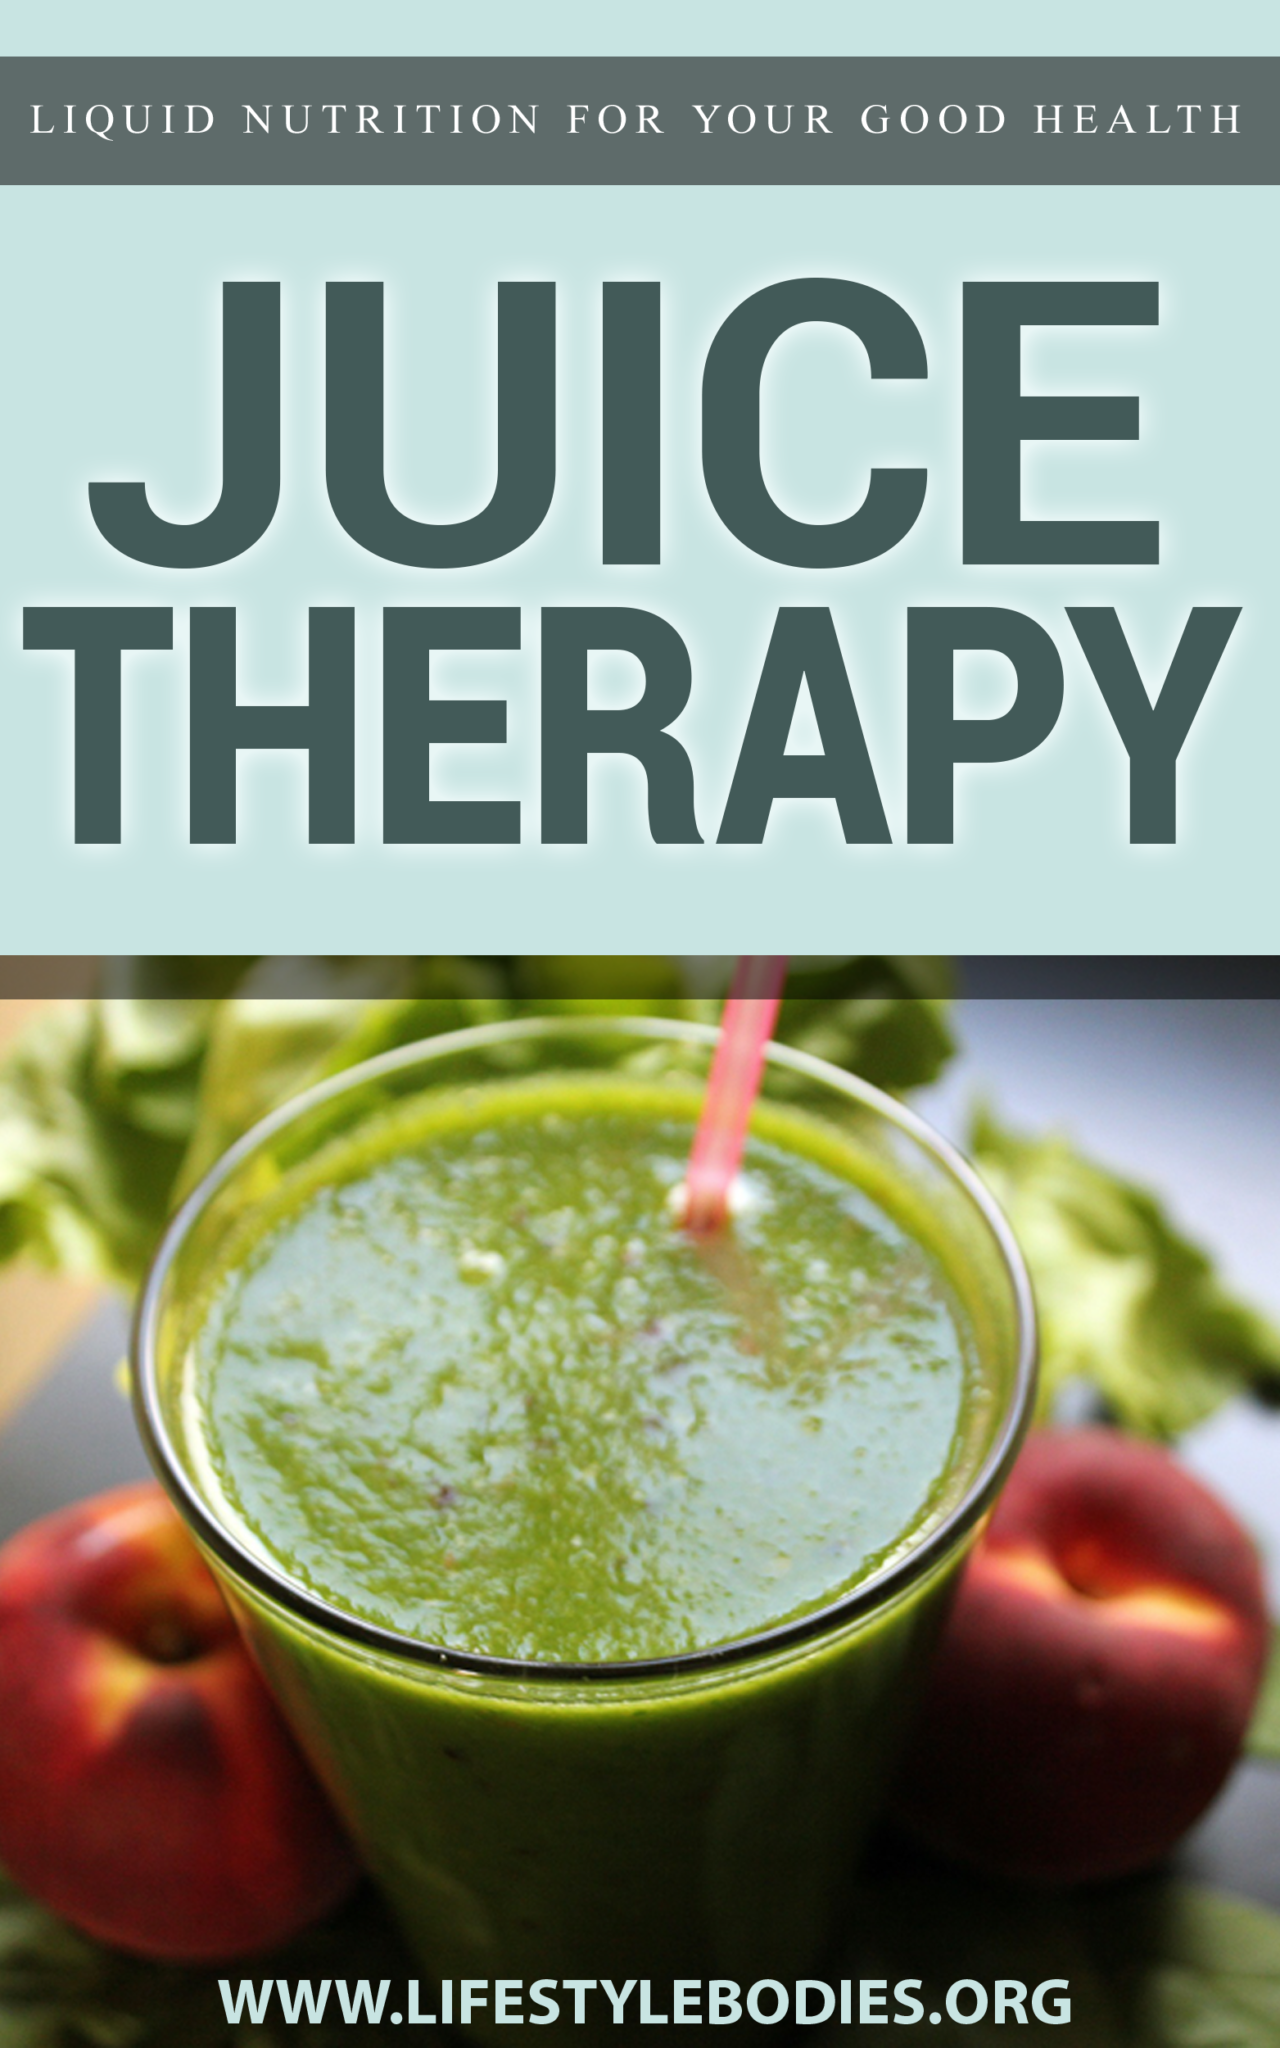 FREE: Juicing Therapy – Liquid Nutrition For Your Good Health by Nick Mansor